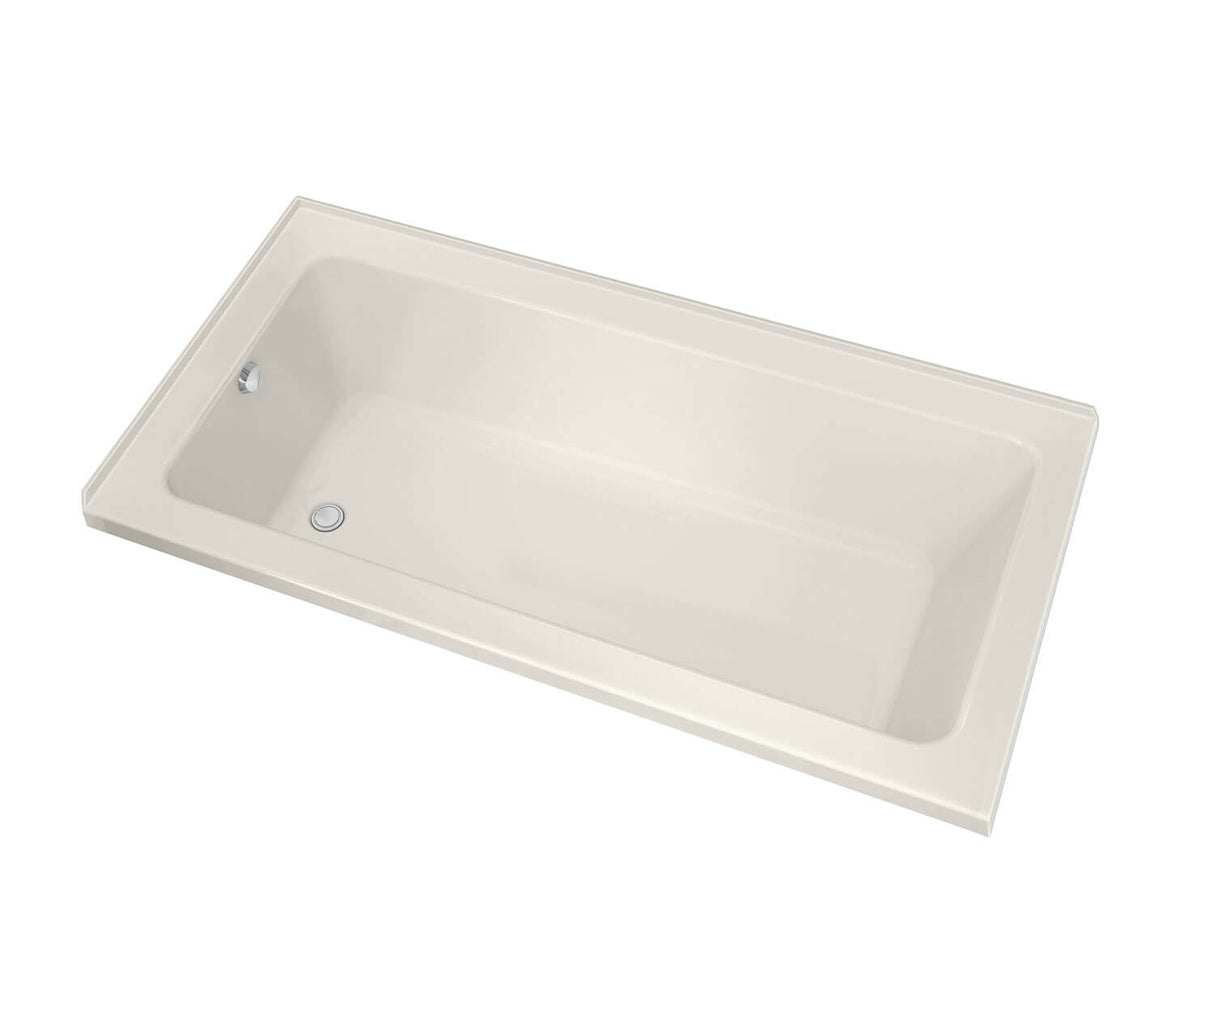 MAAX 106205-R-097-007 Pose 6632 IF Acrylic Corner Left Right-Hand Drain Combined Whirlpool & Aeroeffect Bathtub in Biscuit